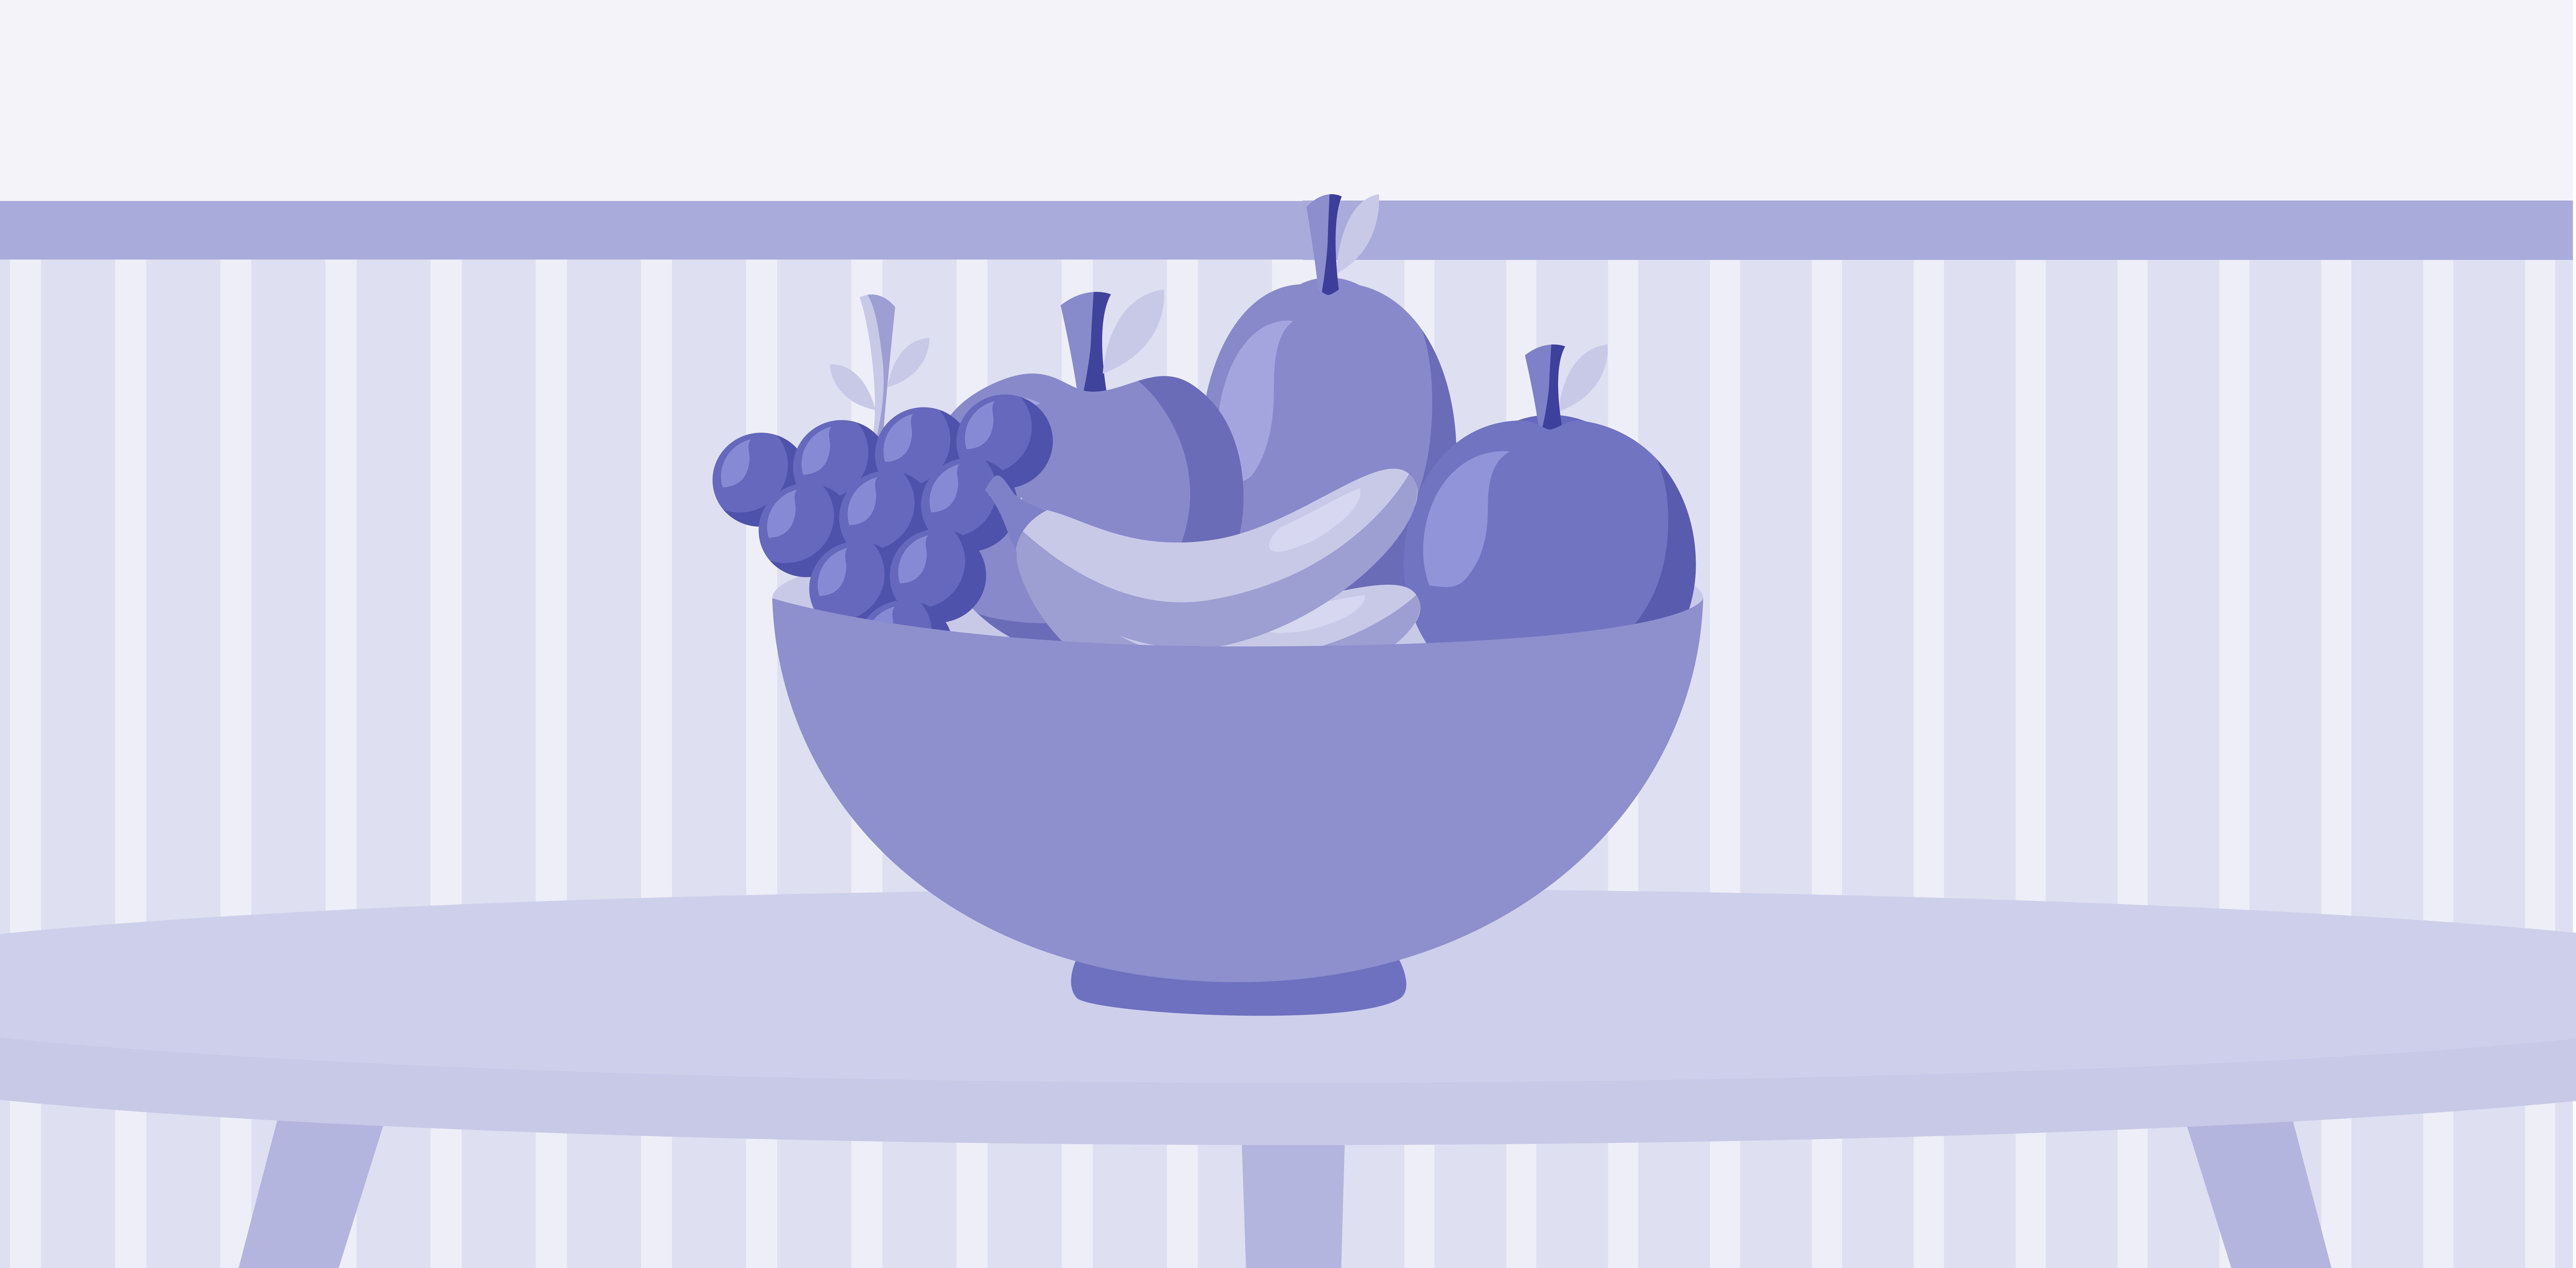 A picture of a bowl filled with apples, oranges, pears, and grapes.